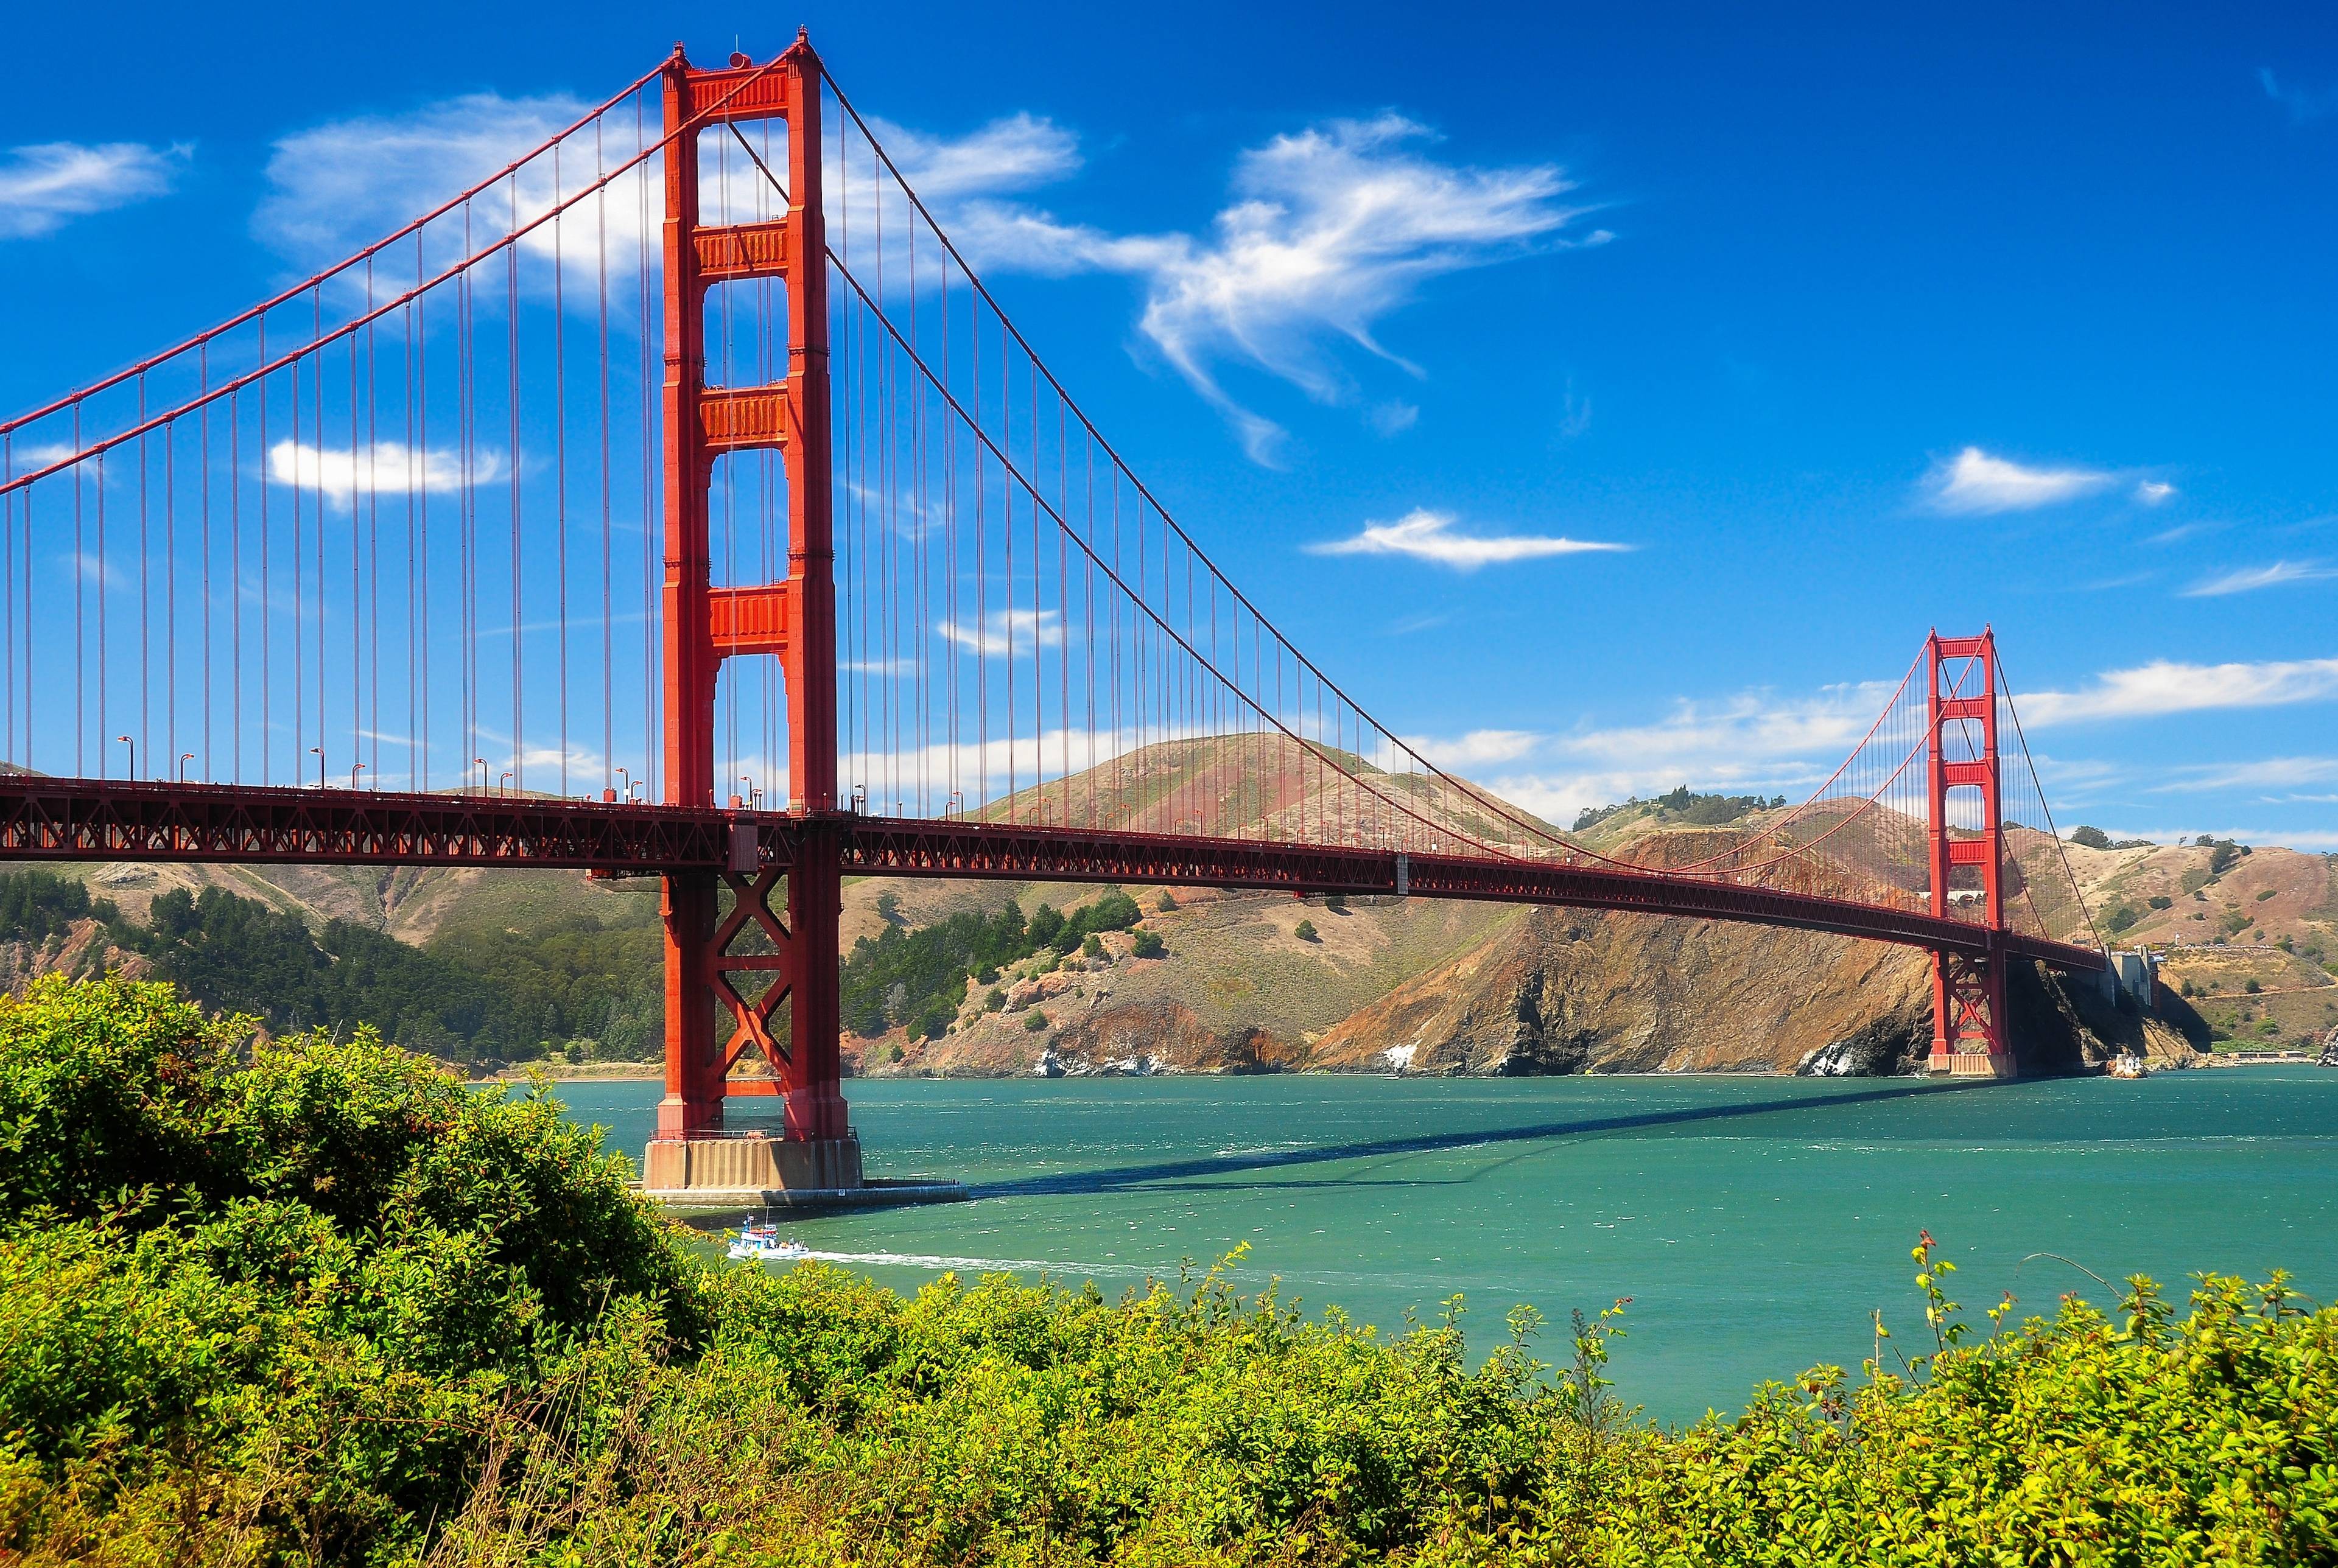 Road Trip Across the Golden Gate: Discover Marin